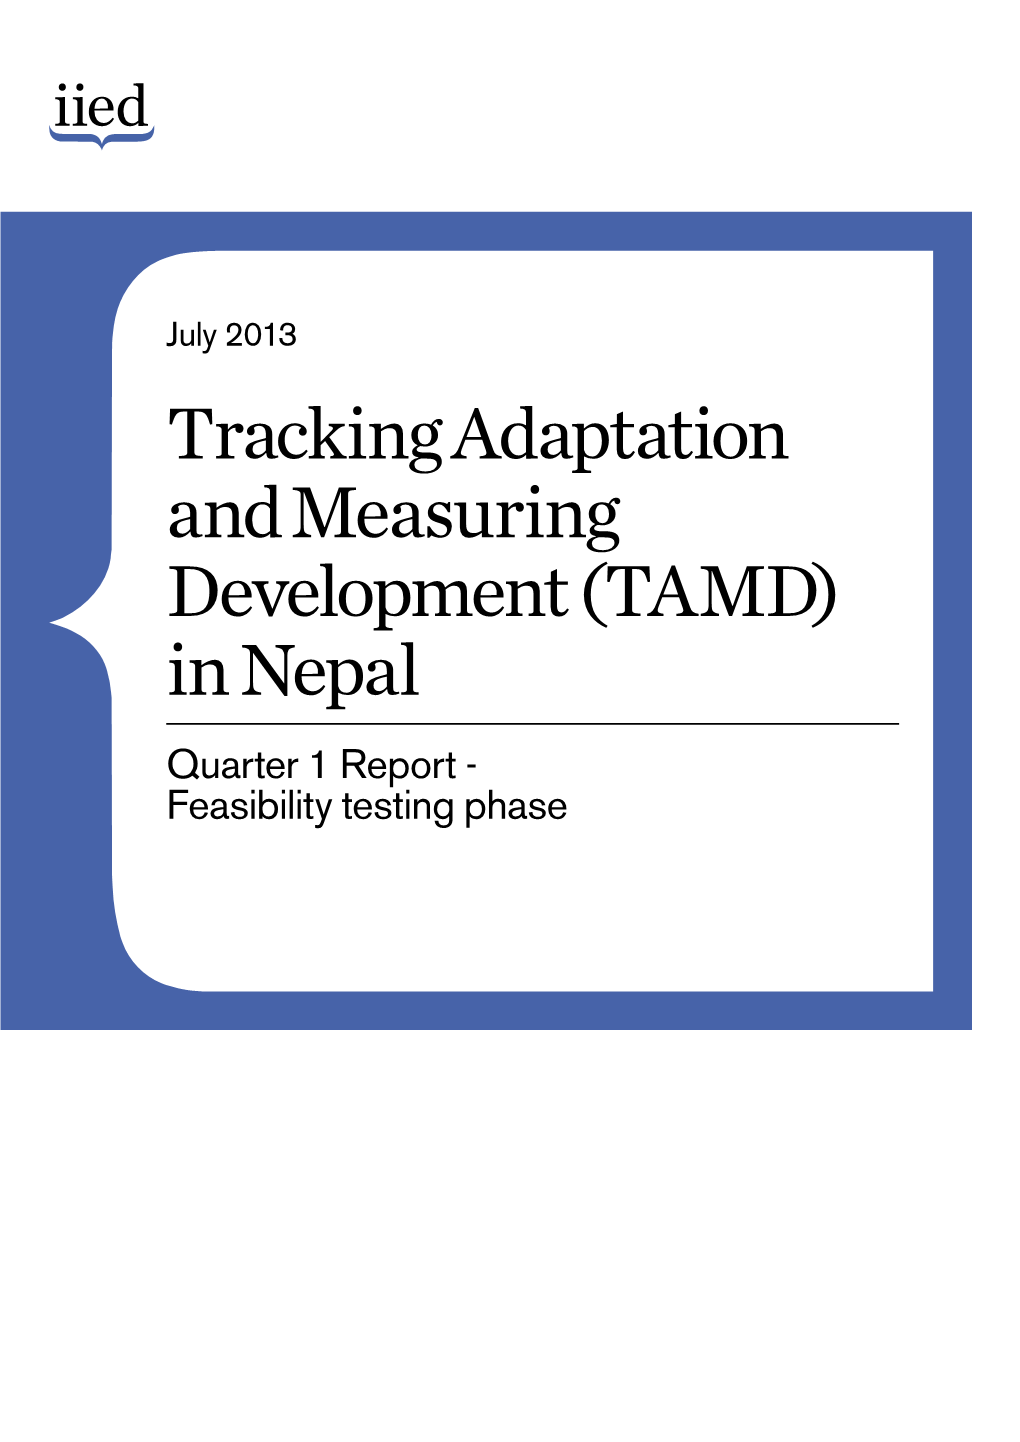 In Nepal Quarter 1 Report - Feasibility Testing Phase